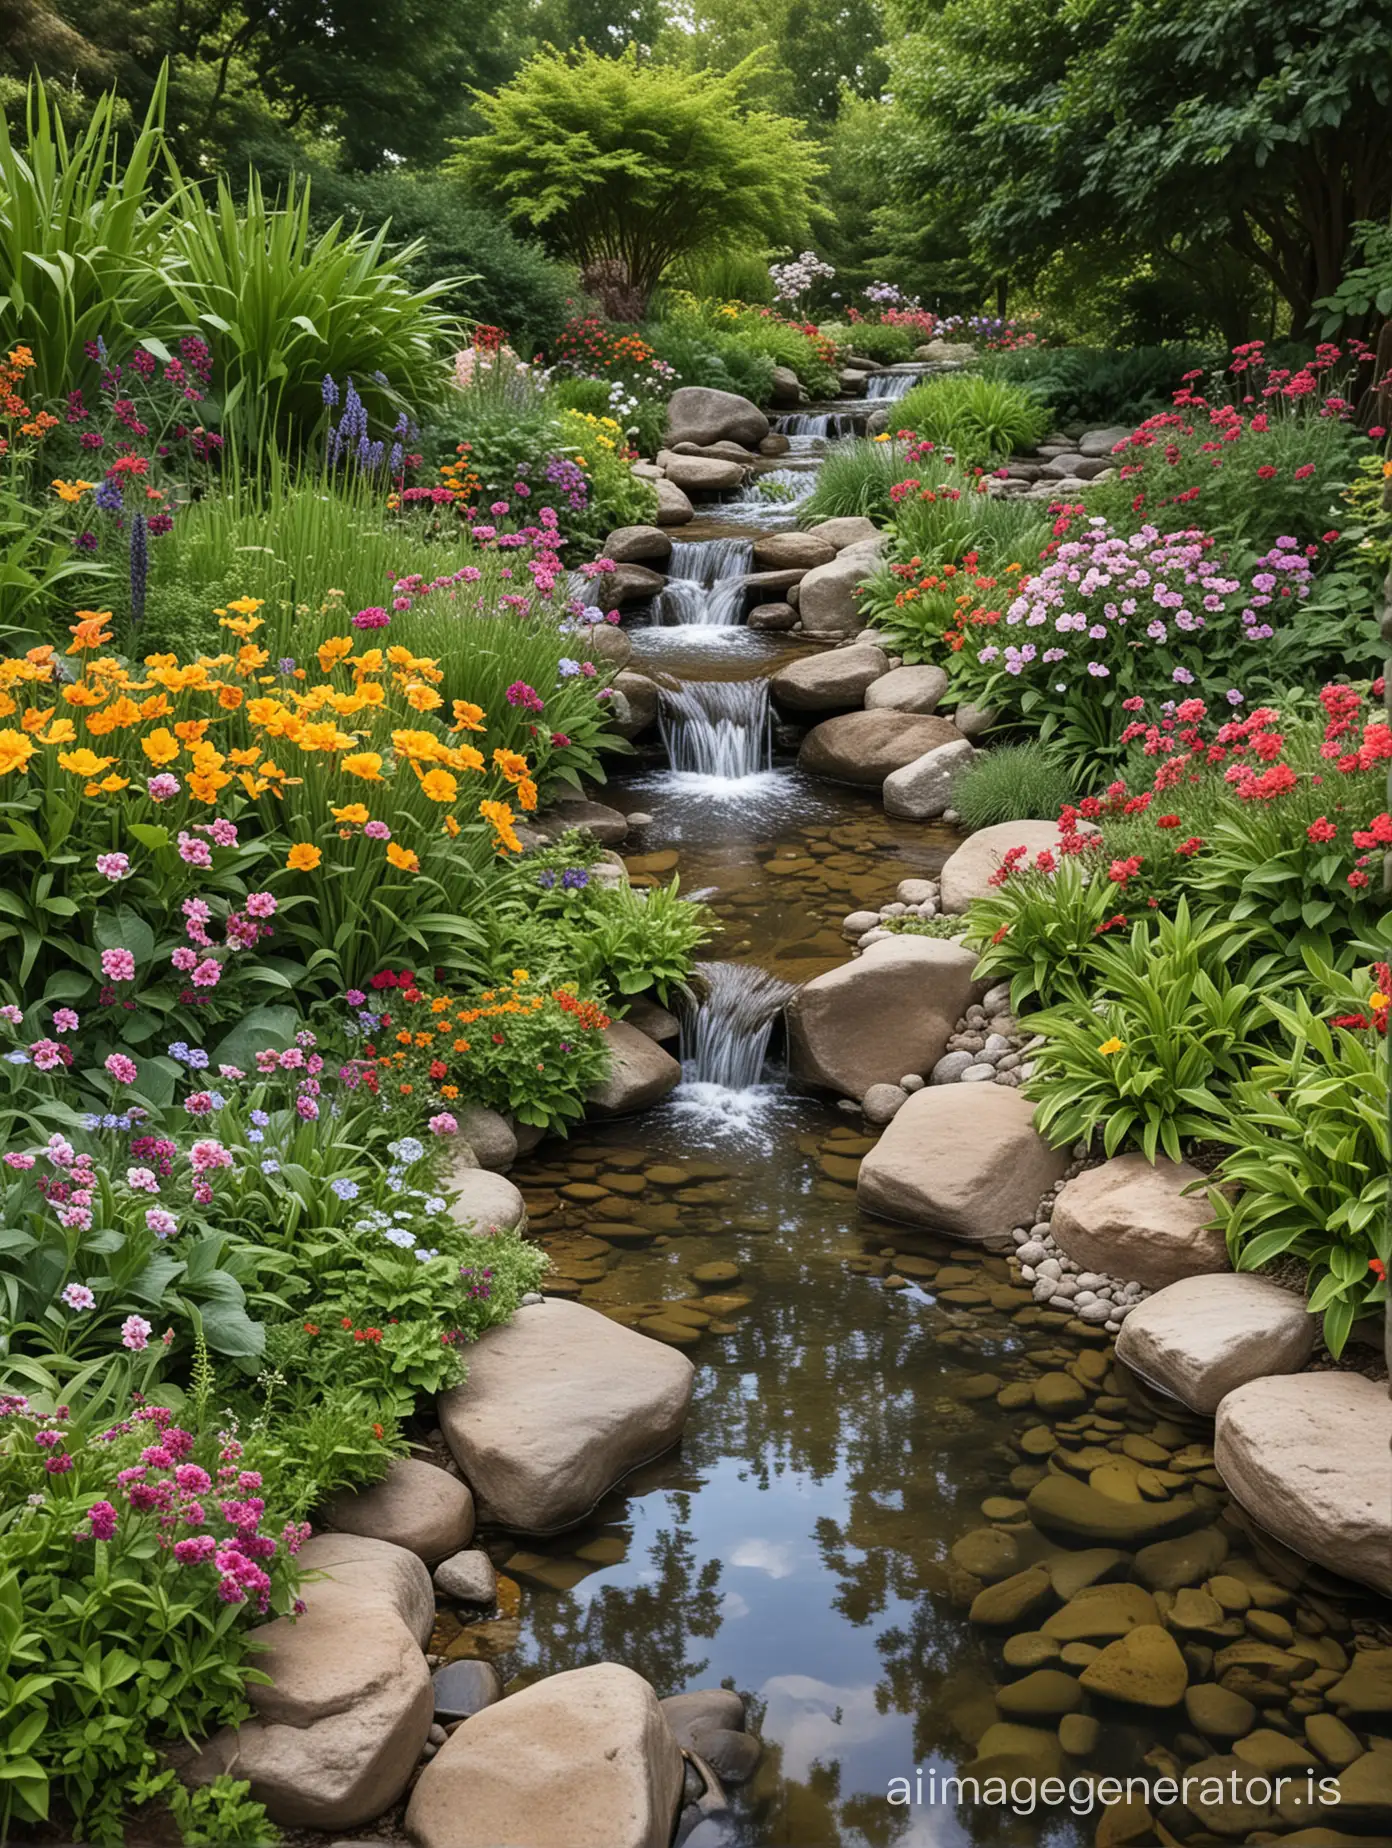 Tranquil-Garden-Scene-with-Colorful-Flowers-and-Serene-Stream